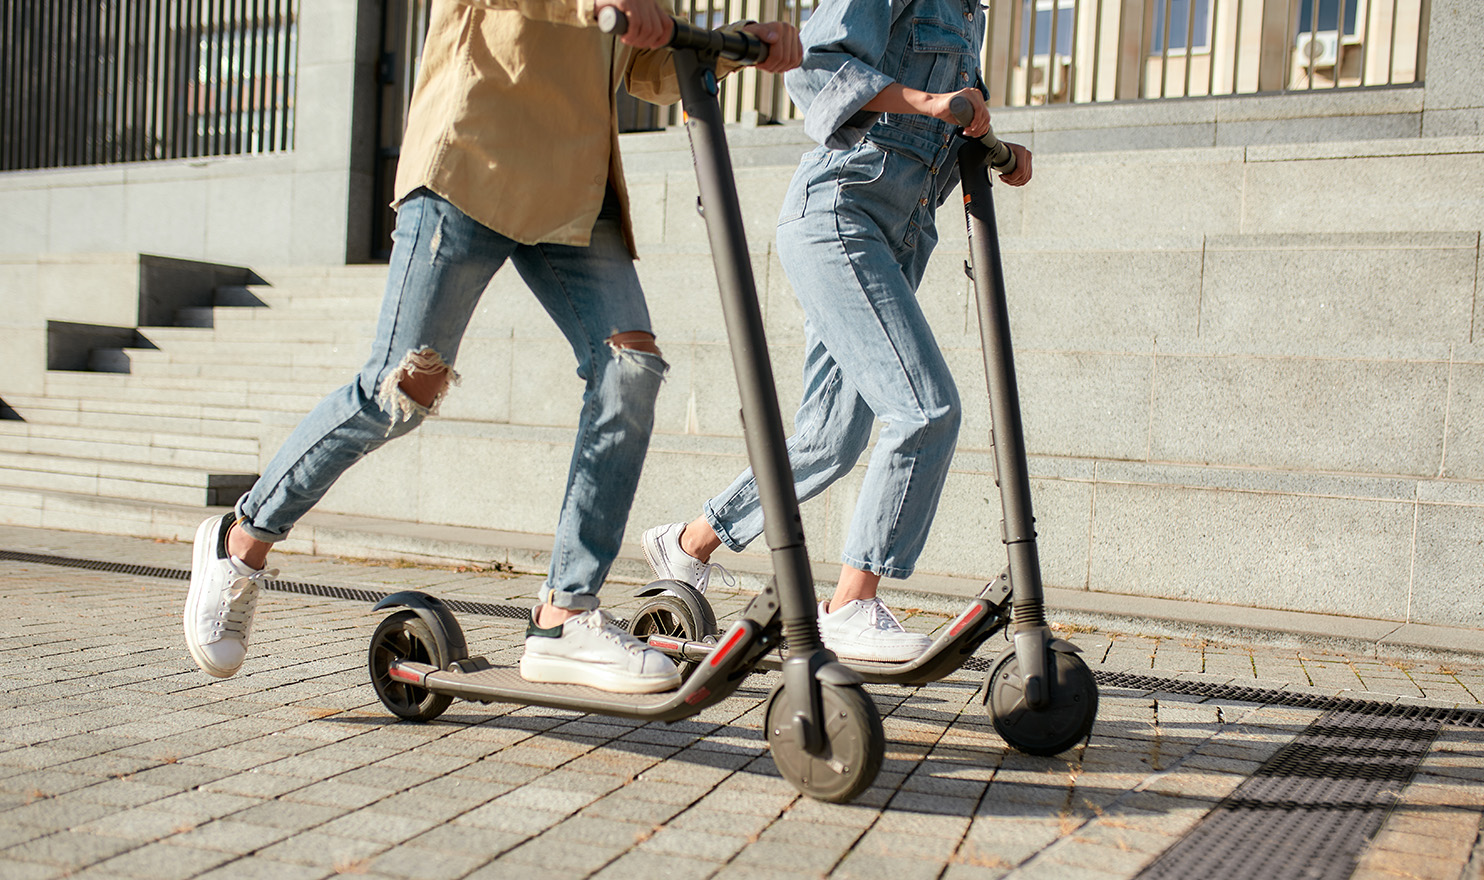 Two people riding on electric scooters on a public sidewalk.